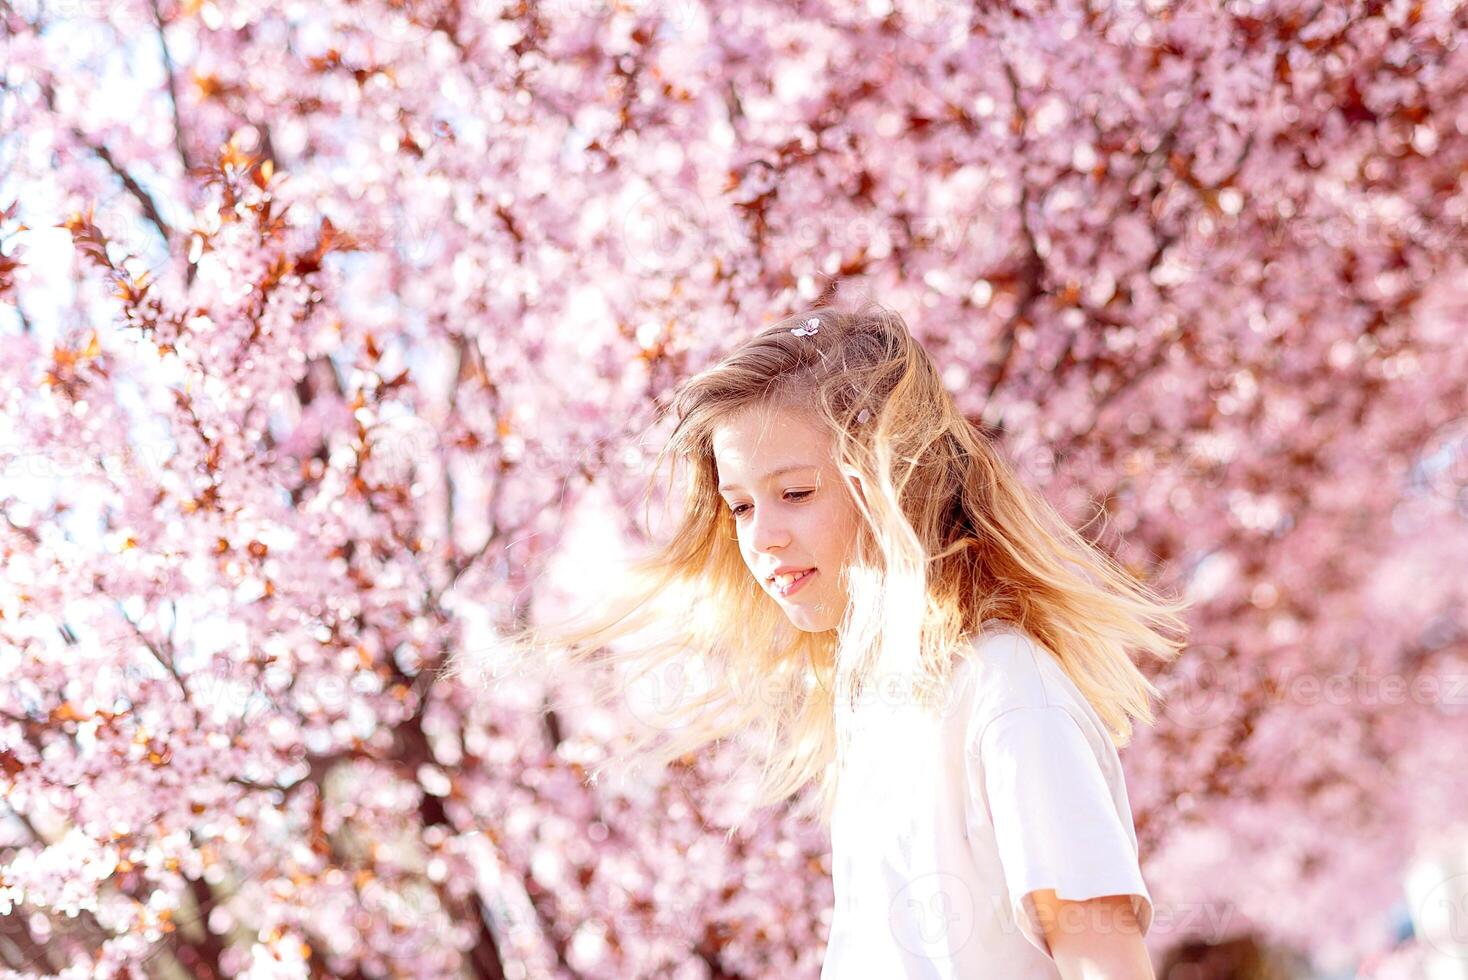 girl among beautiful cherry blossoms in full bloom photo